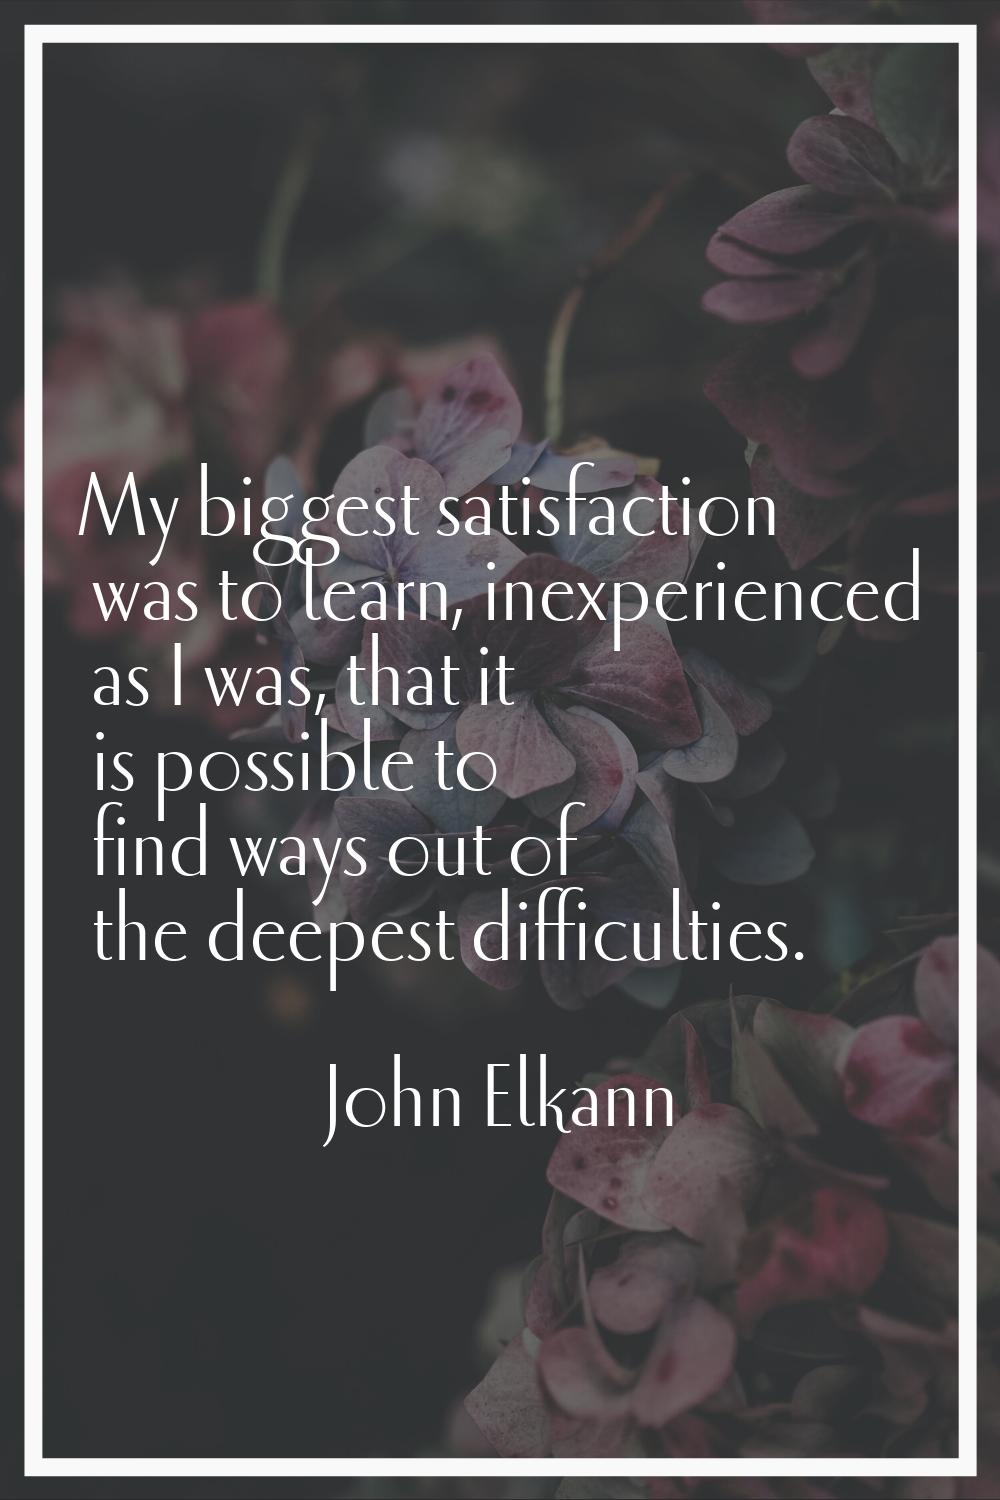 My biggest satisfaction was to learn, inexperienced as I was, that it is possible to find ways out 